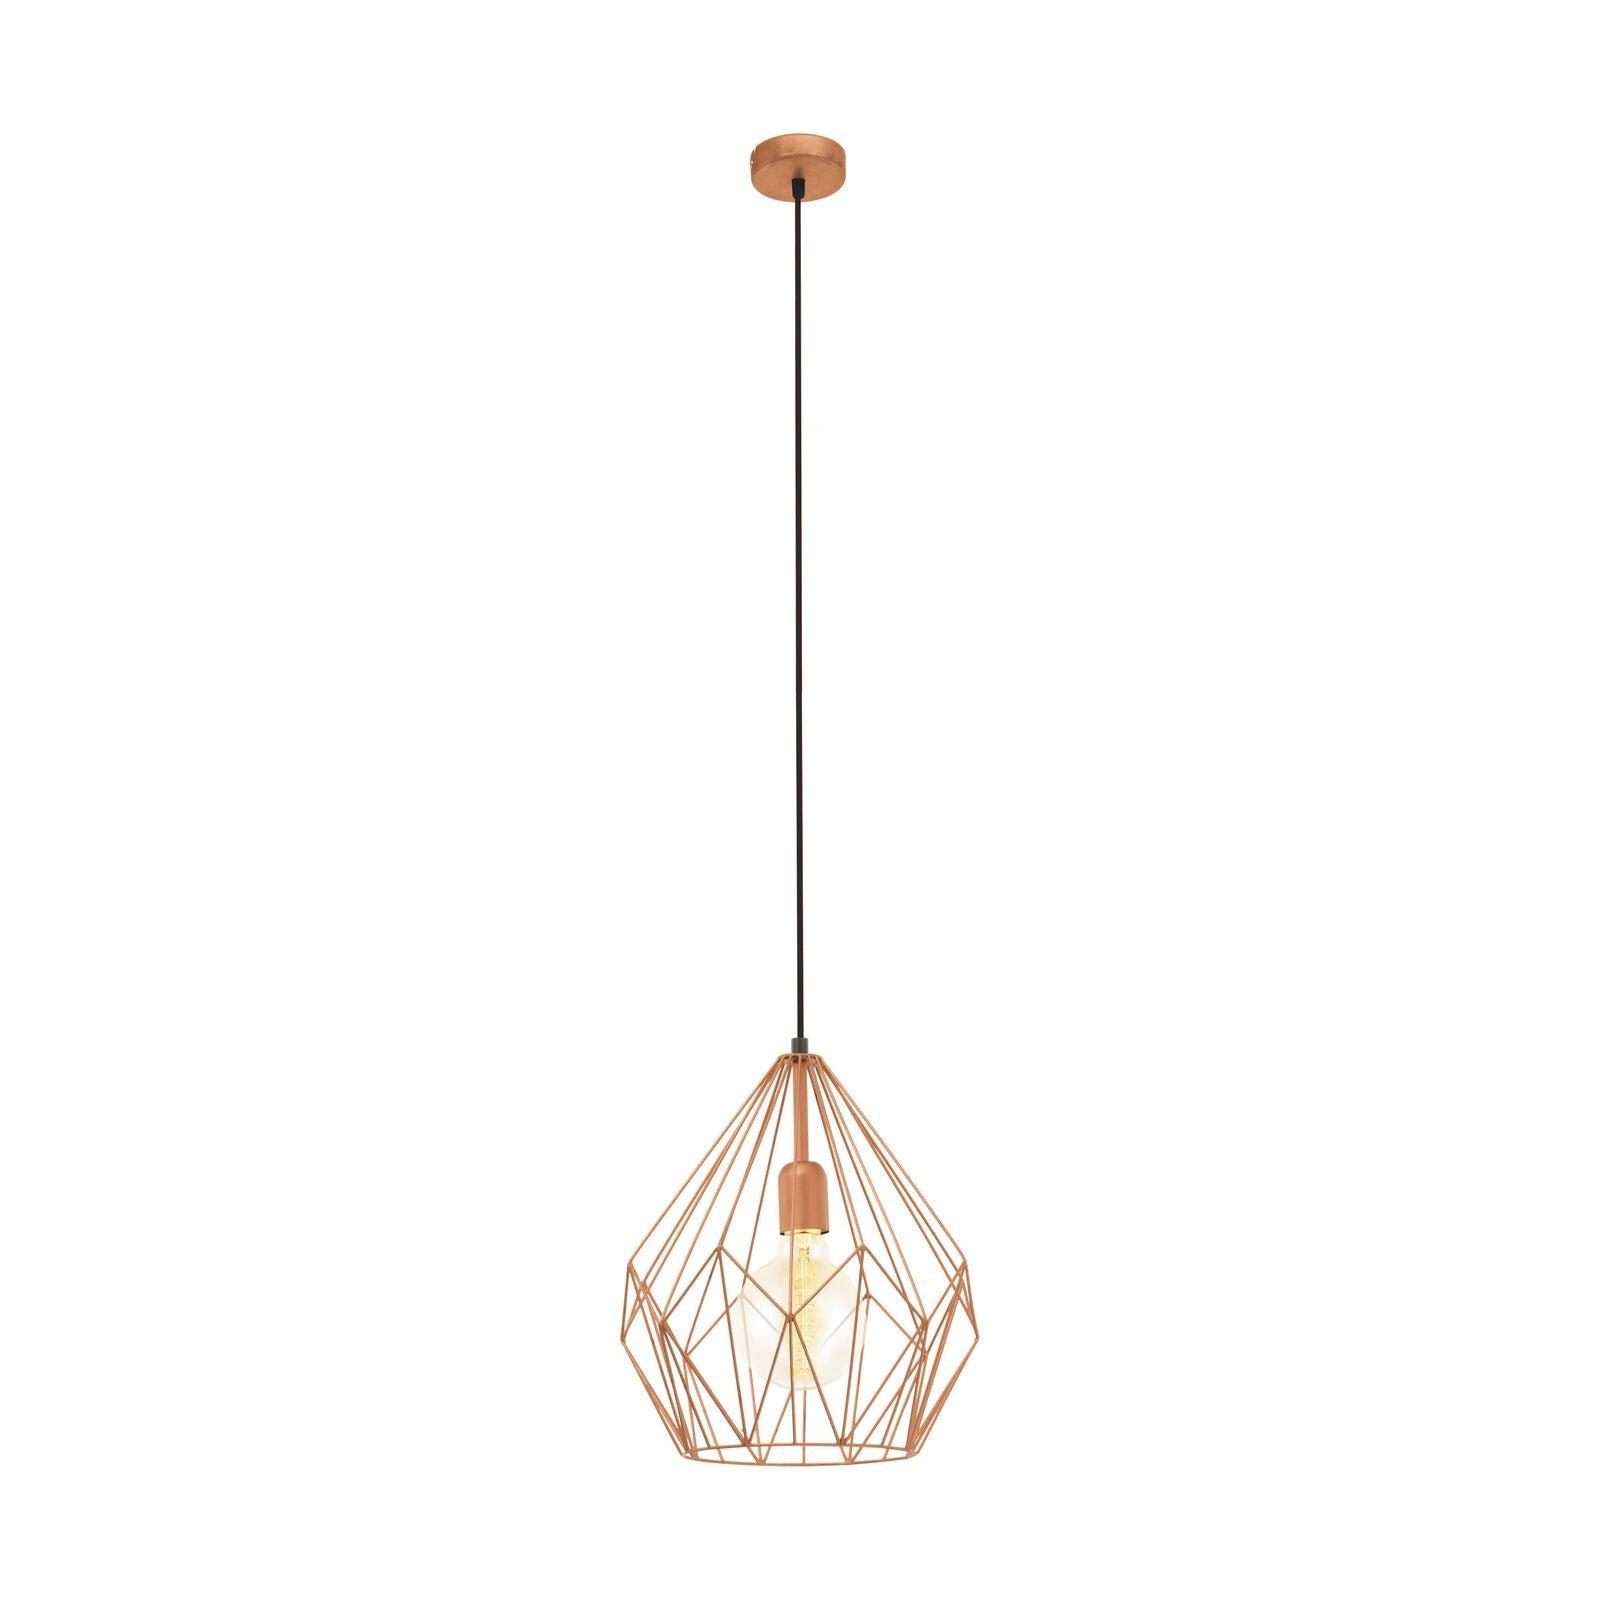 Hanging Ceiling Pendant Light Copper Wire Cage 1x 60W E27 Hallway Feature Lamp